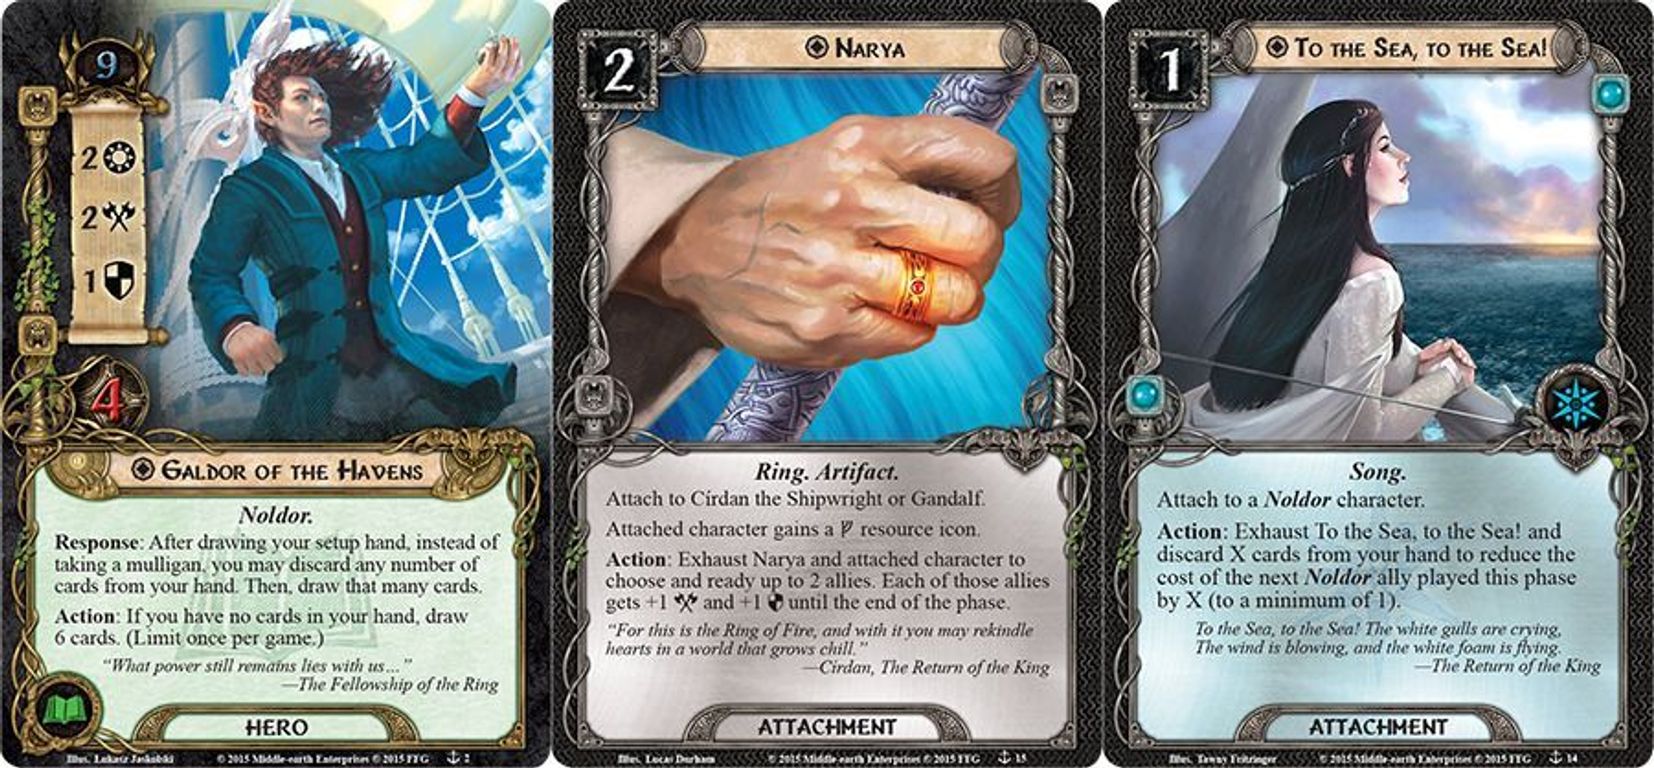 The Lord of the Rings: The Card Game - The Grey Havens cards